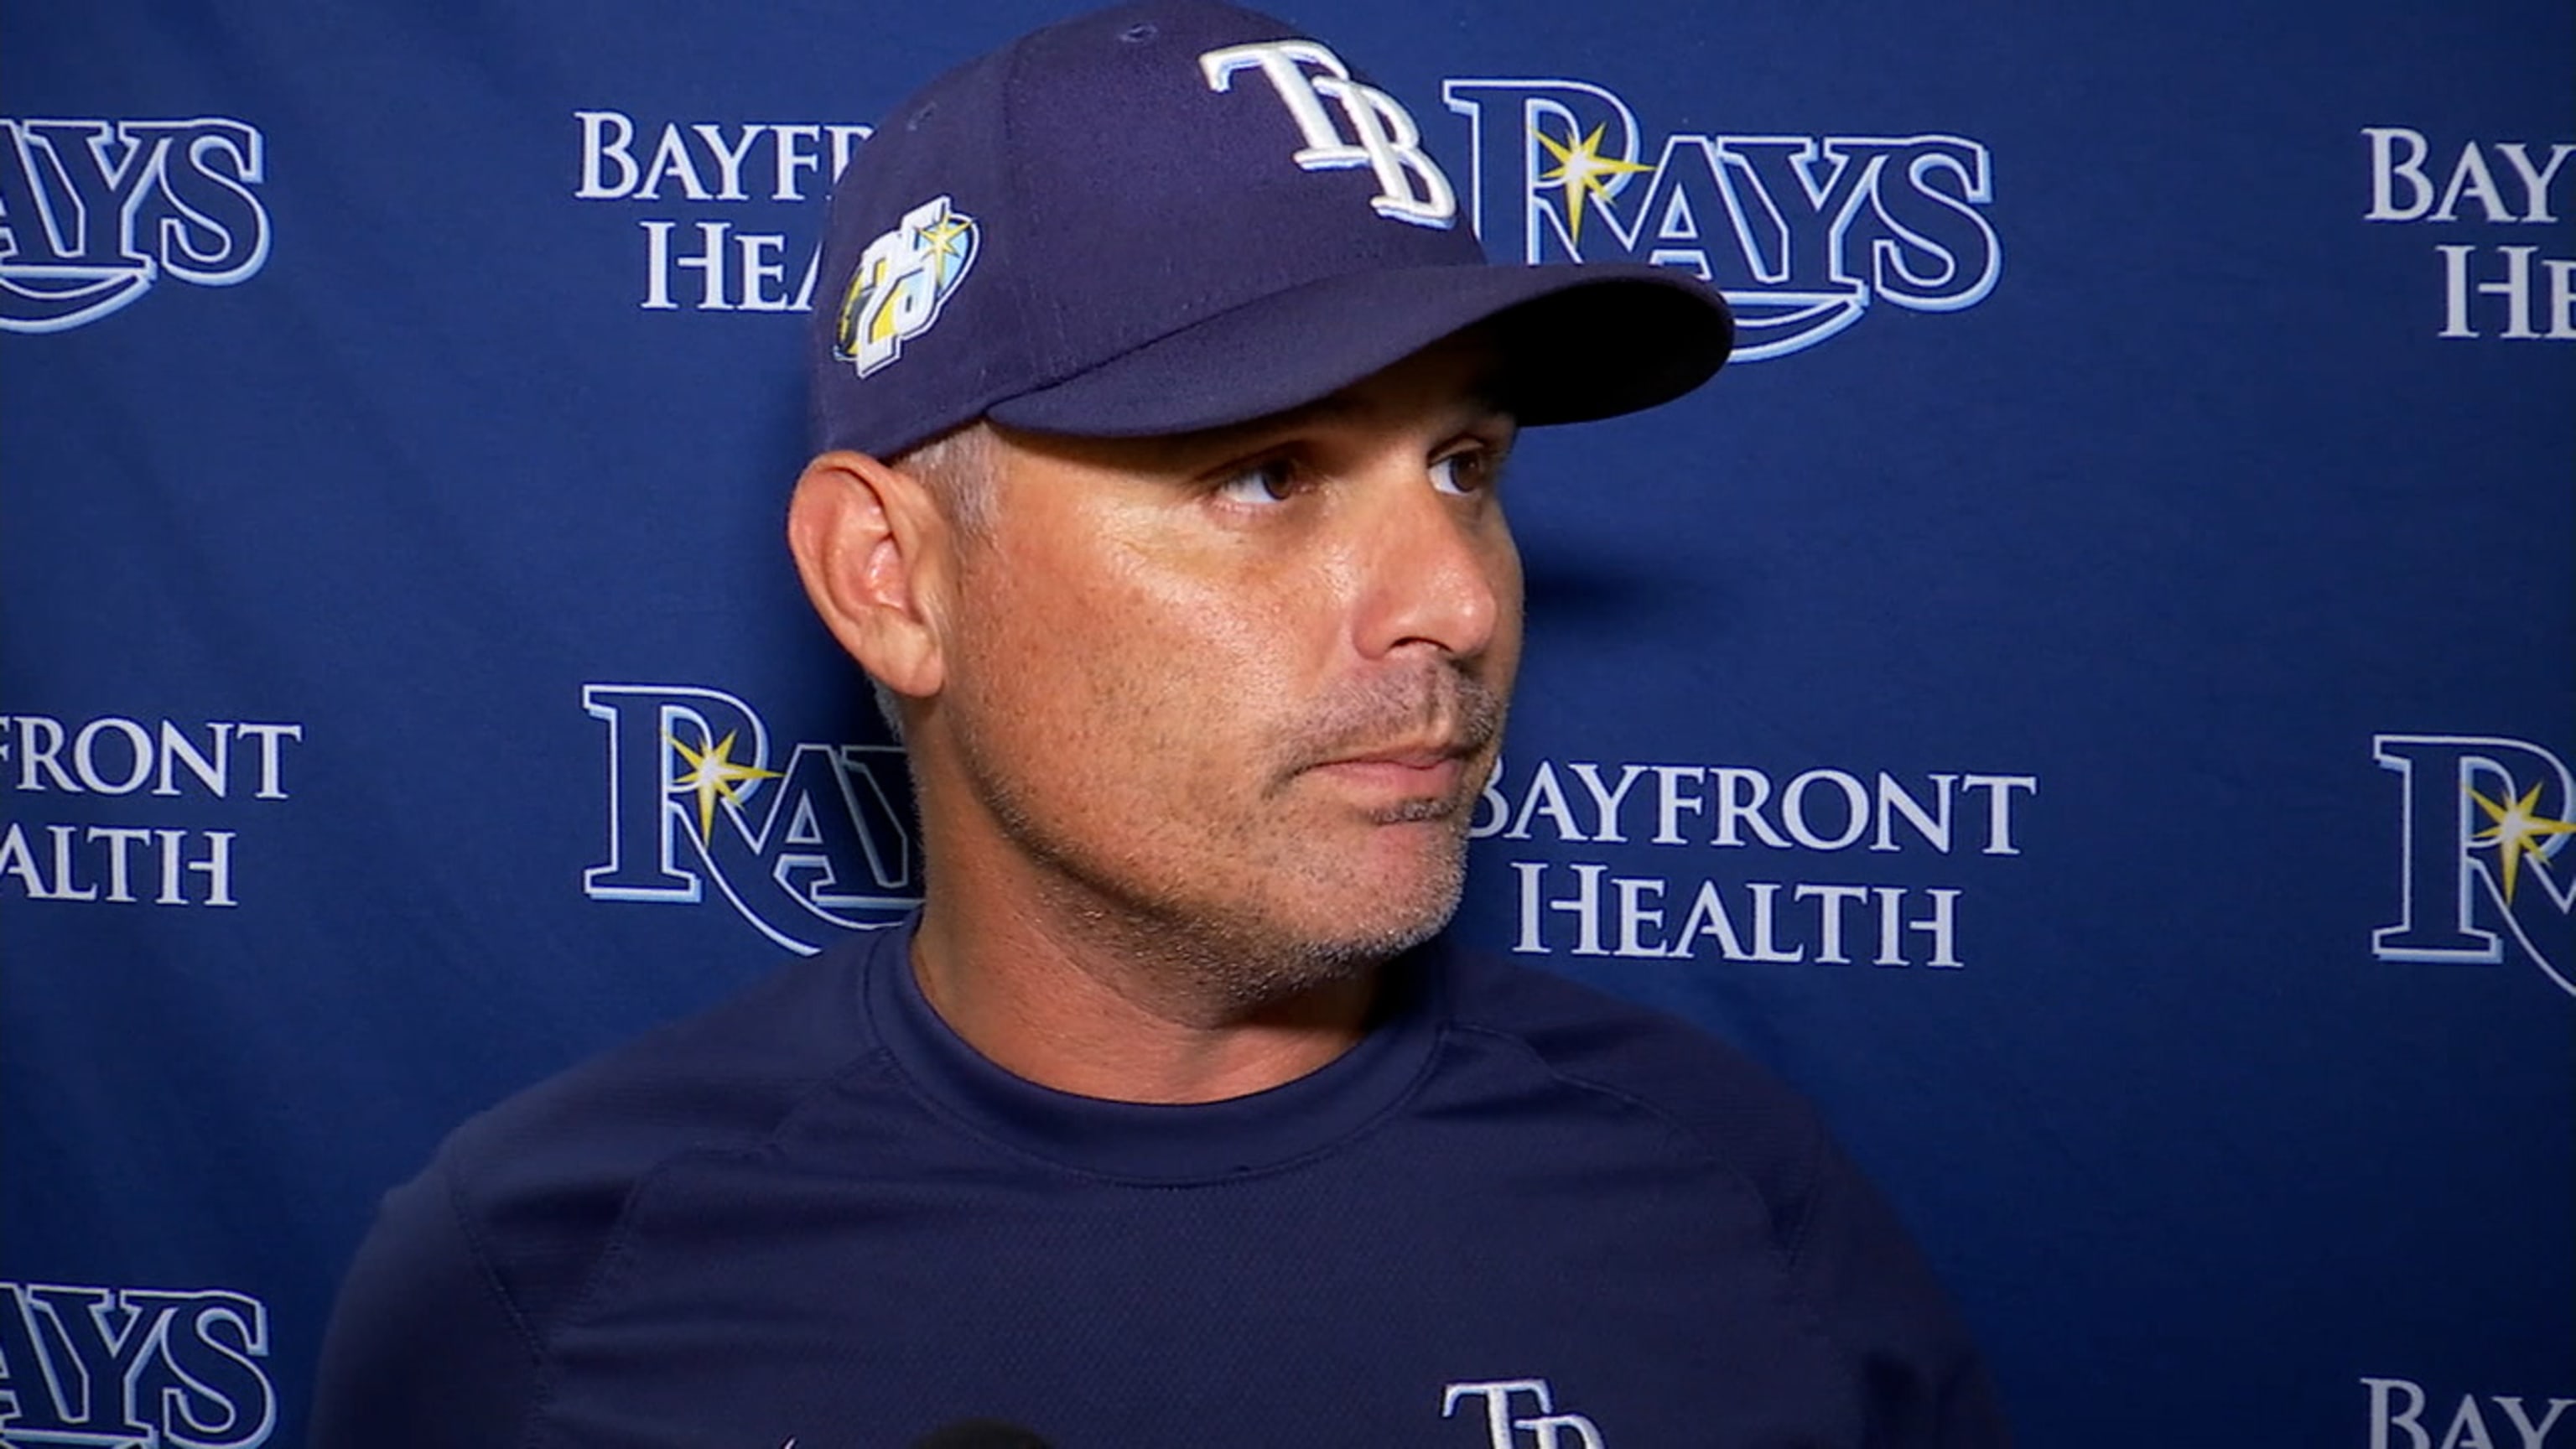 Ramirez has career-high 4 hits in Rays' 18-4 rout of Angels to get